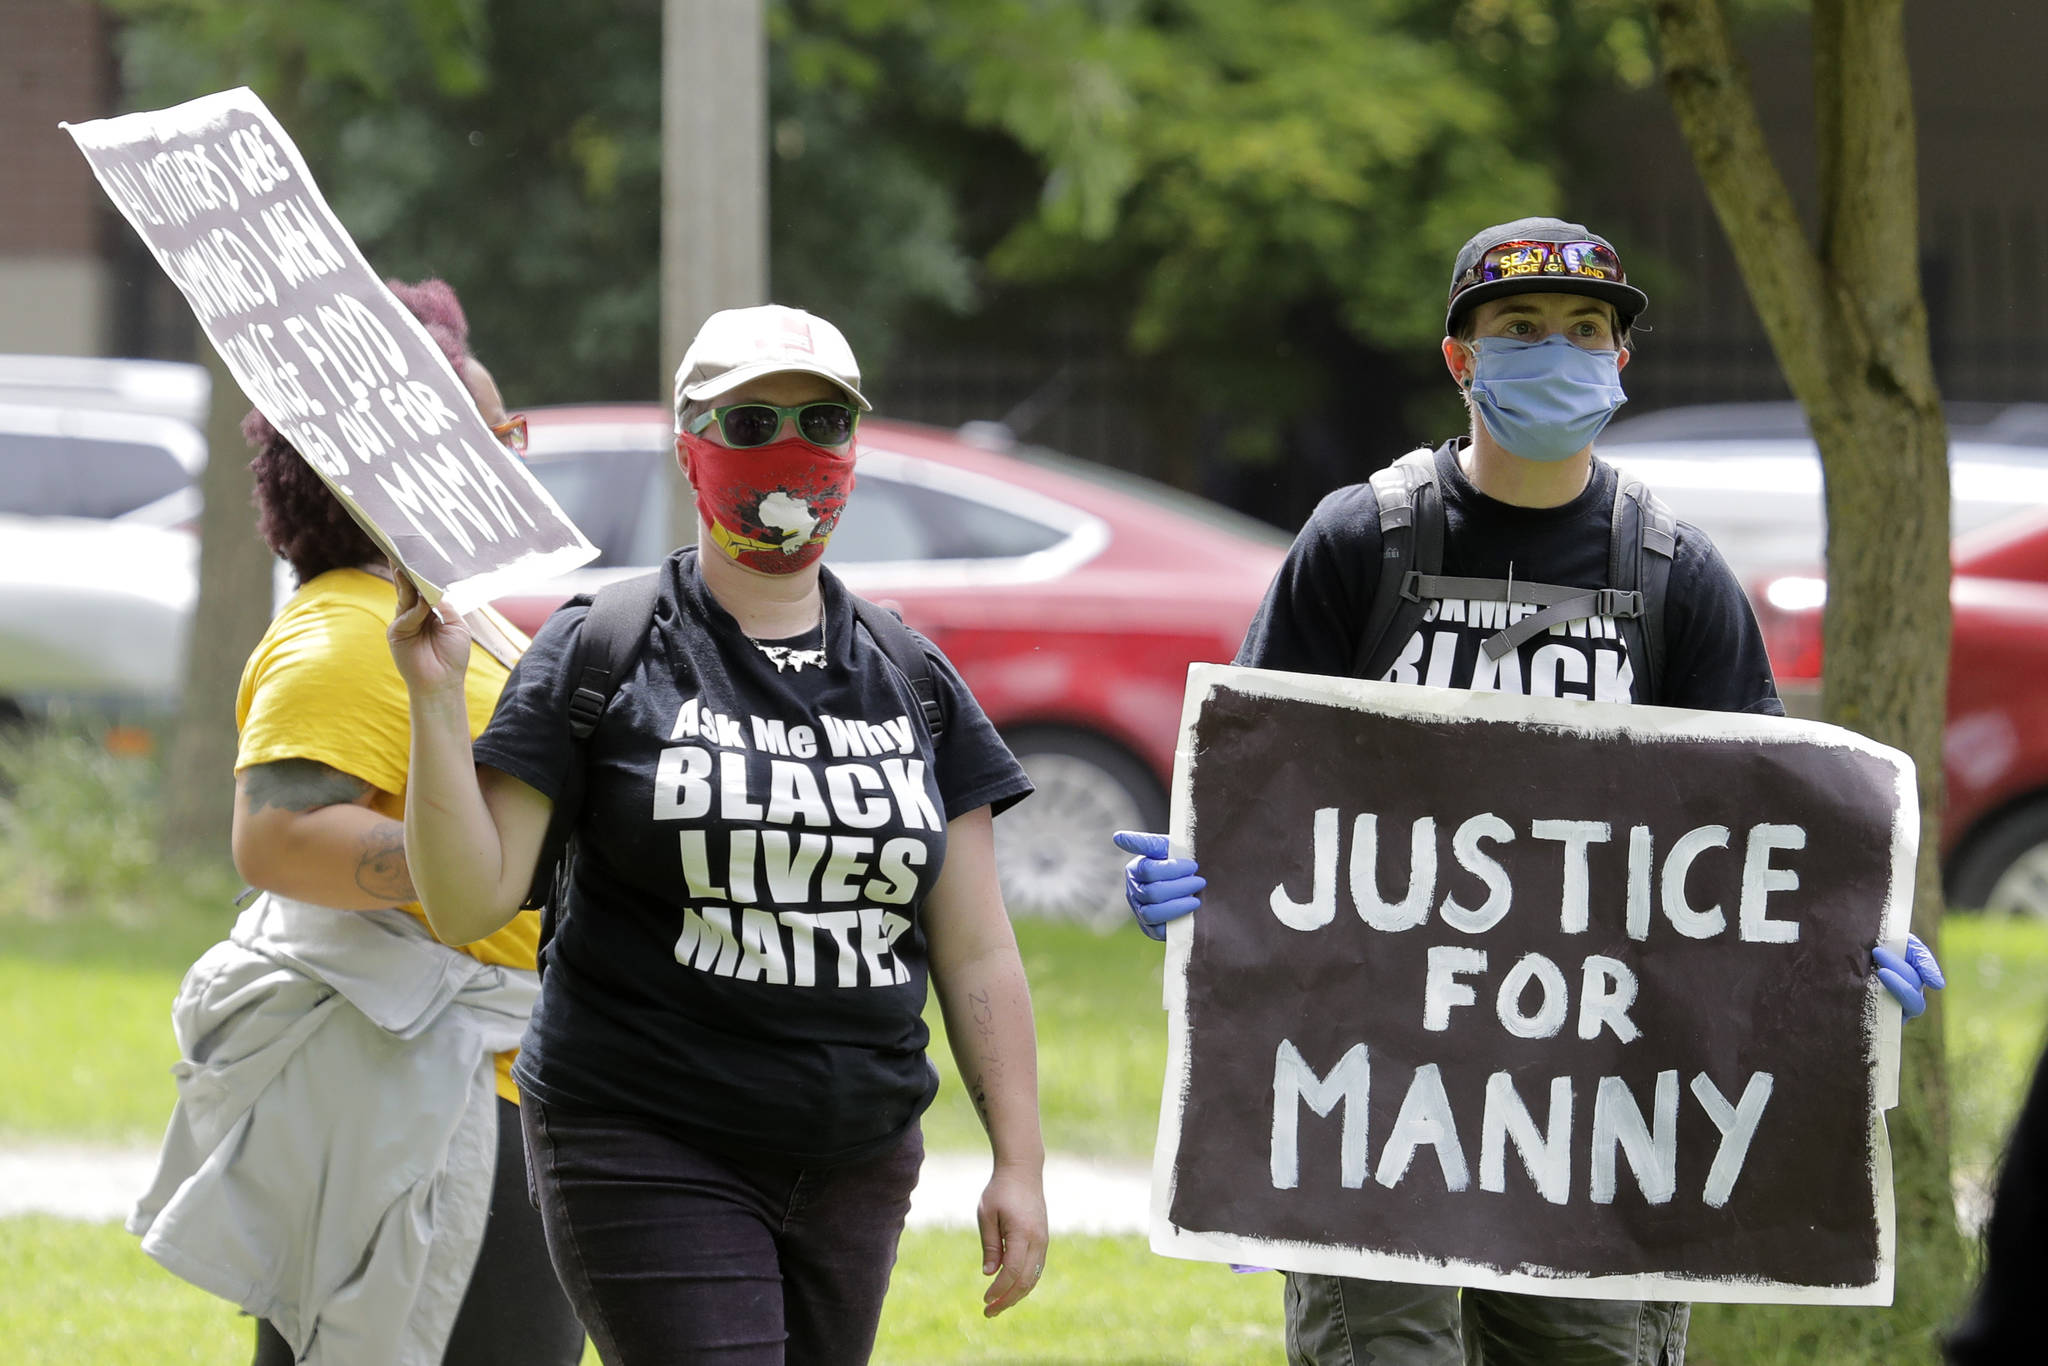 FILE - A protester holds a sign that reads "Justice for Manny" in this June 5, 2020 file photo in Tacoma, Wash., during a protest against police brutality. On Thursday, May 27, 2021, the Washington state attorney general filed criminal charges against three police officers in the death of Manuel Ellis, a Black man who died after telling the Tacoma officers who were restraining him he couldn't breathe. (AP Photo/Ted S. Warren, File)